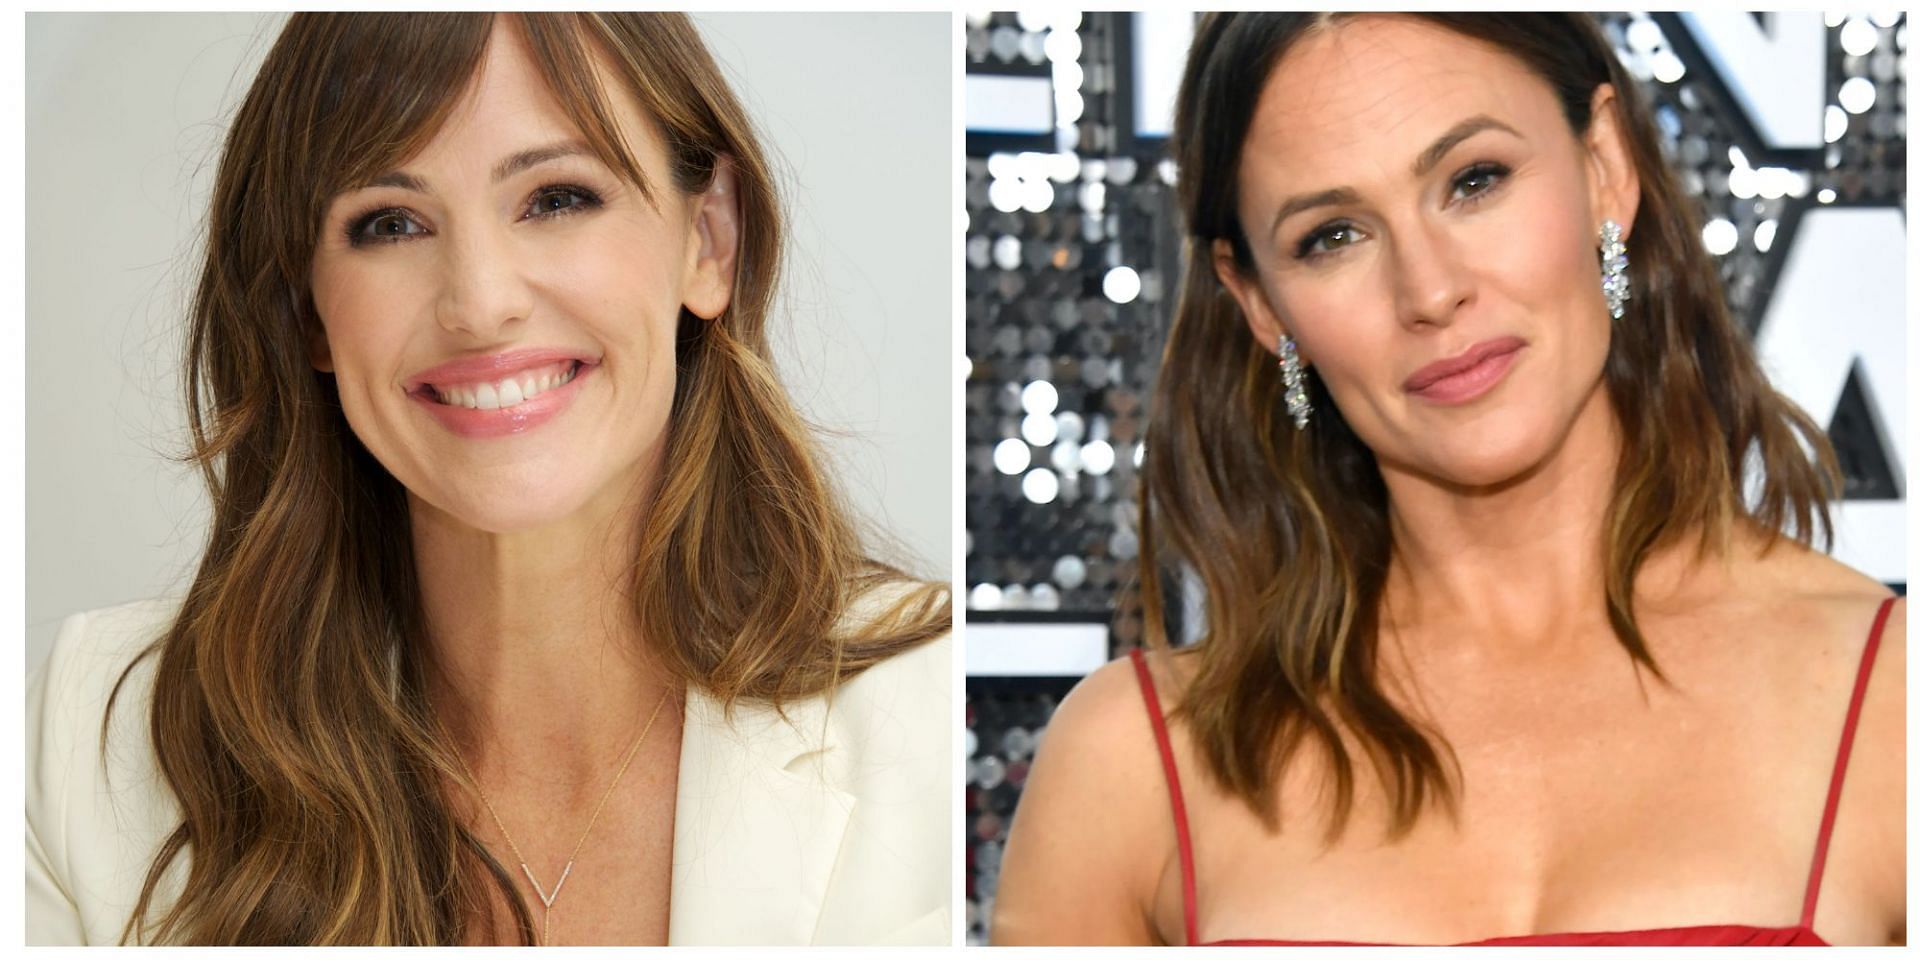 Jennifer Garner shares her advice and beauty tips for the young girls, including her teen daughters. (Image via Twitter)